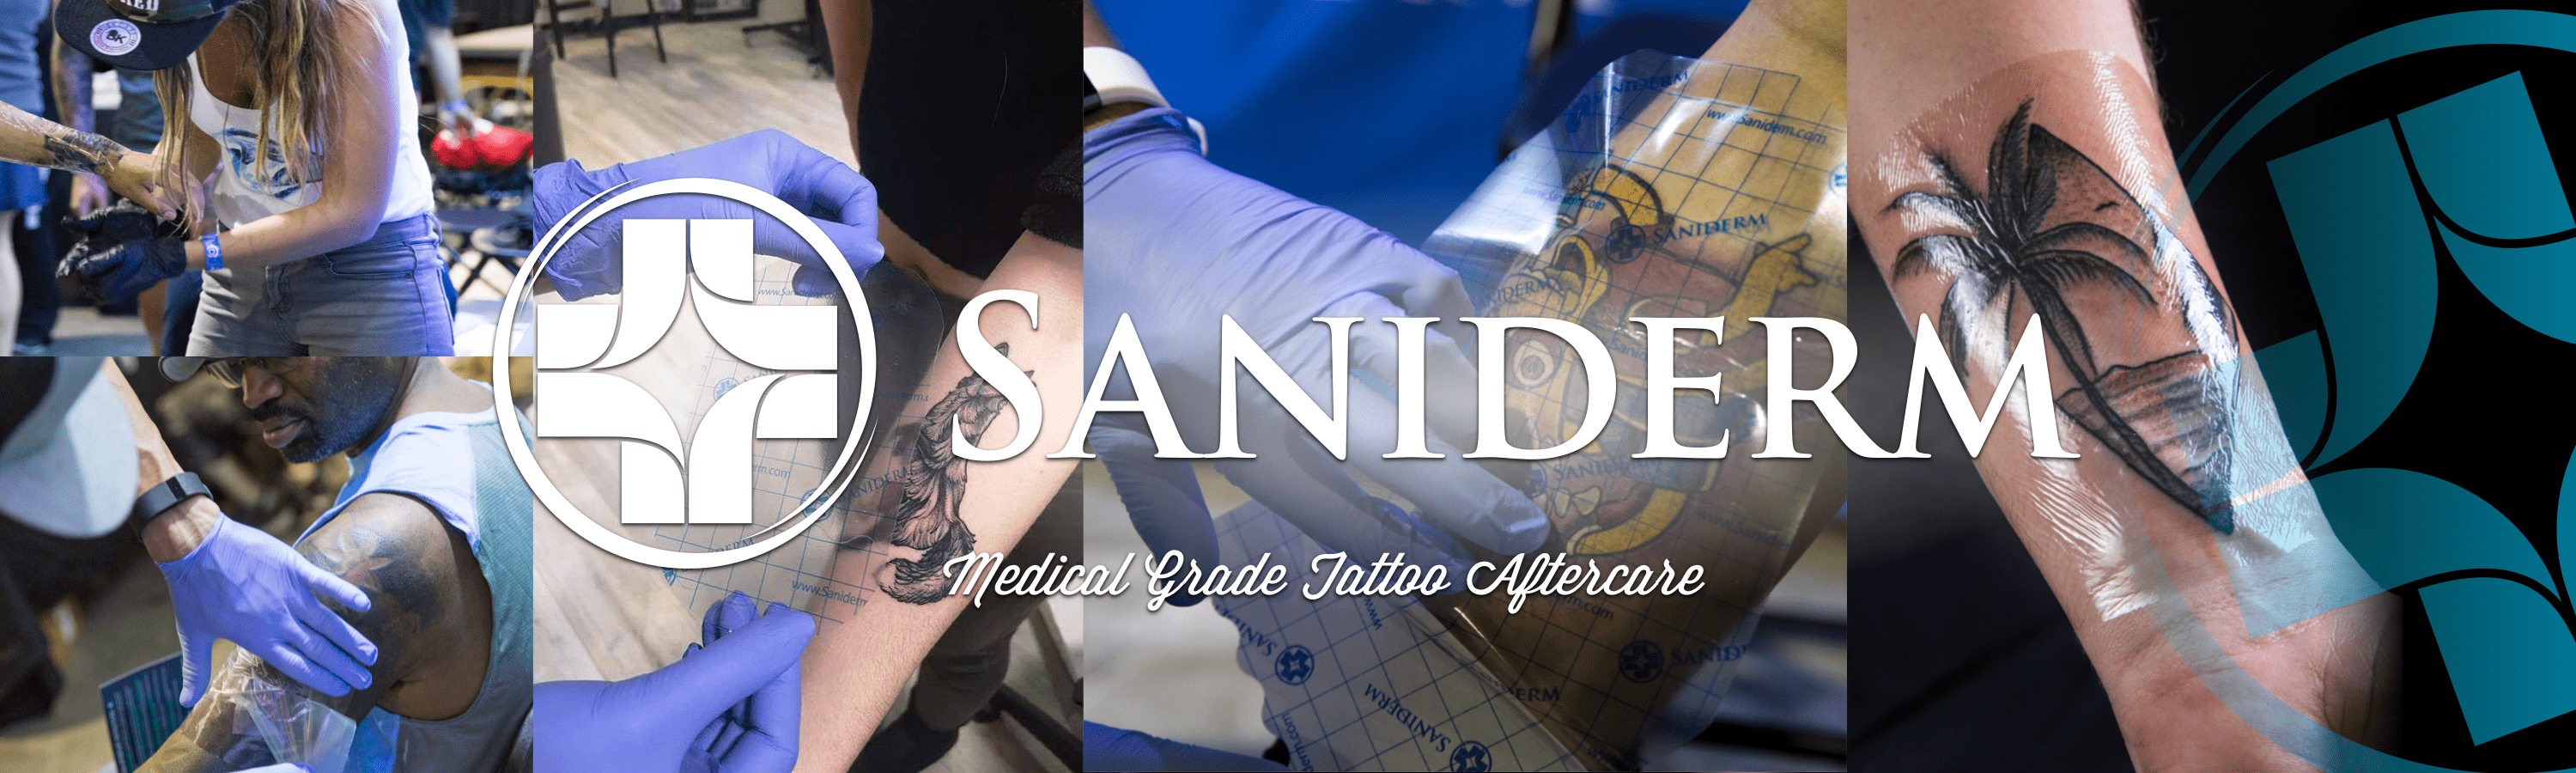 How to Take Care of a New Tattoo | Tattoo Guide | Saniderm